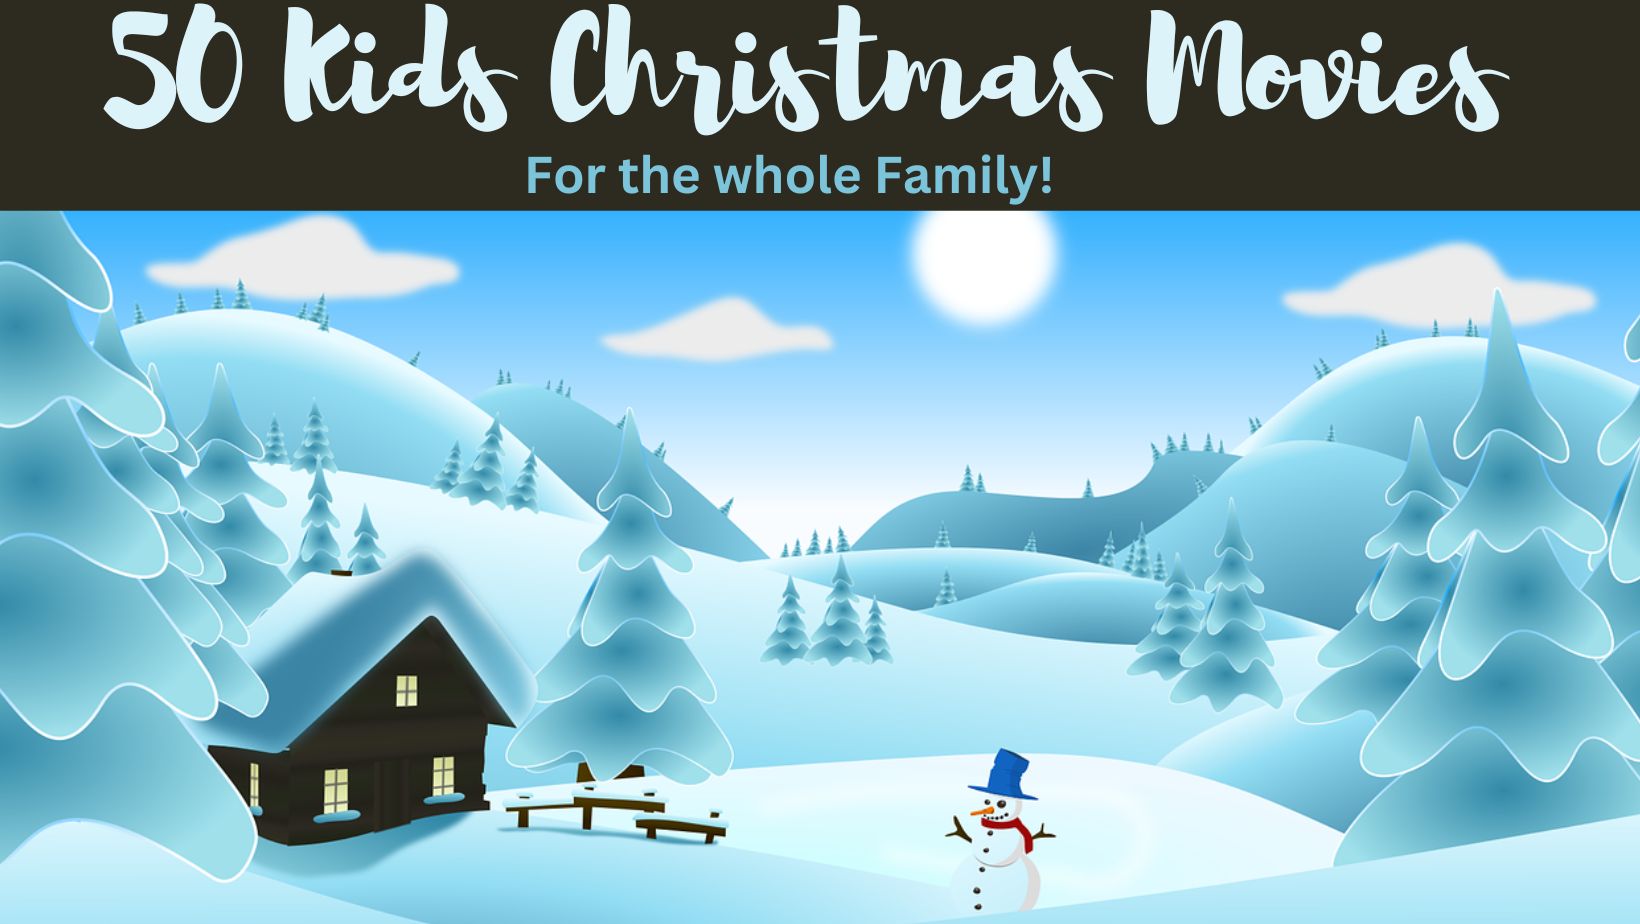 image of a light blue winter landscape with a cabin and a snowman. Text "50 kids christmas movies for the whole family"